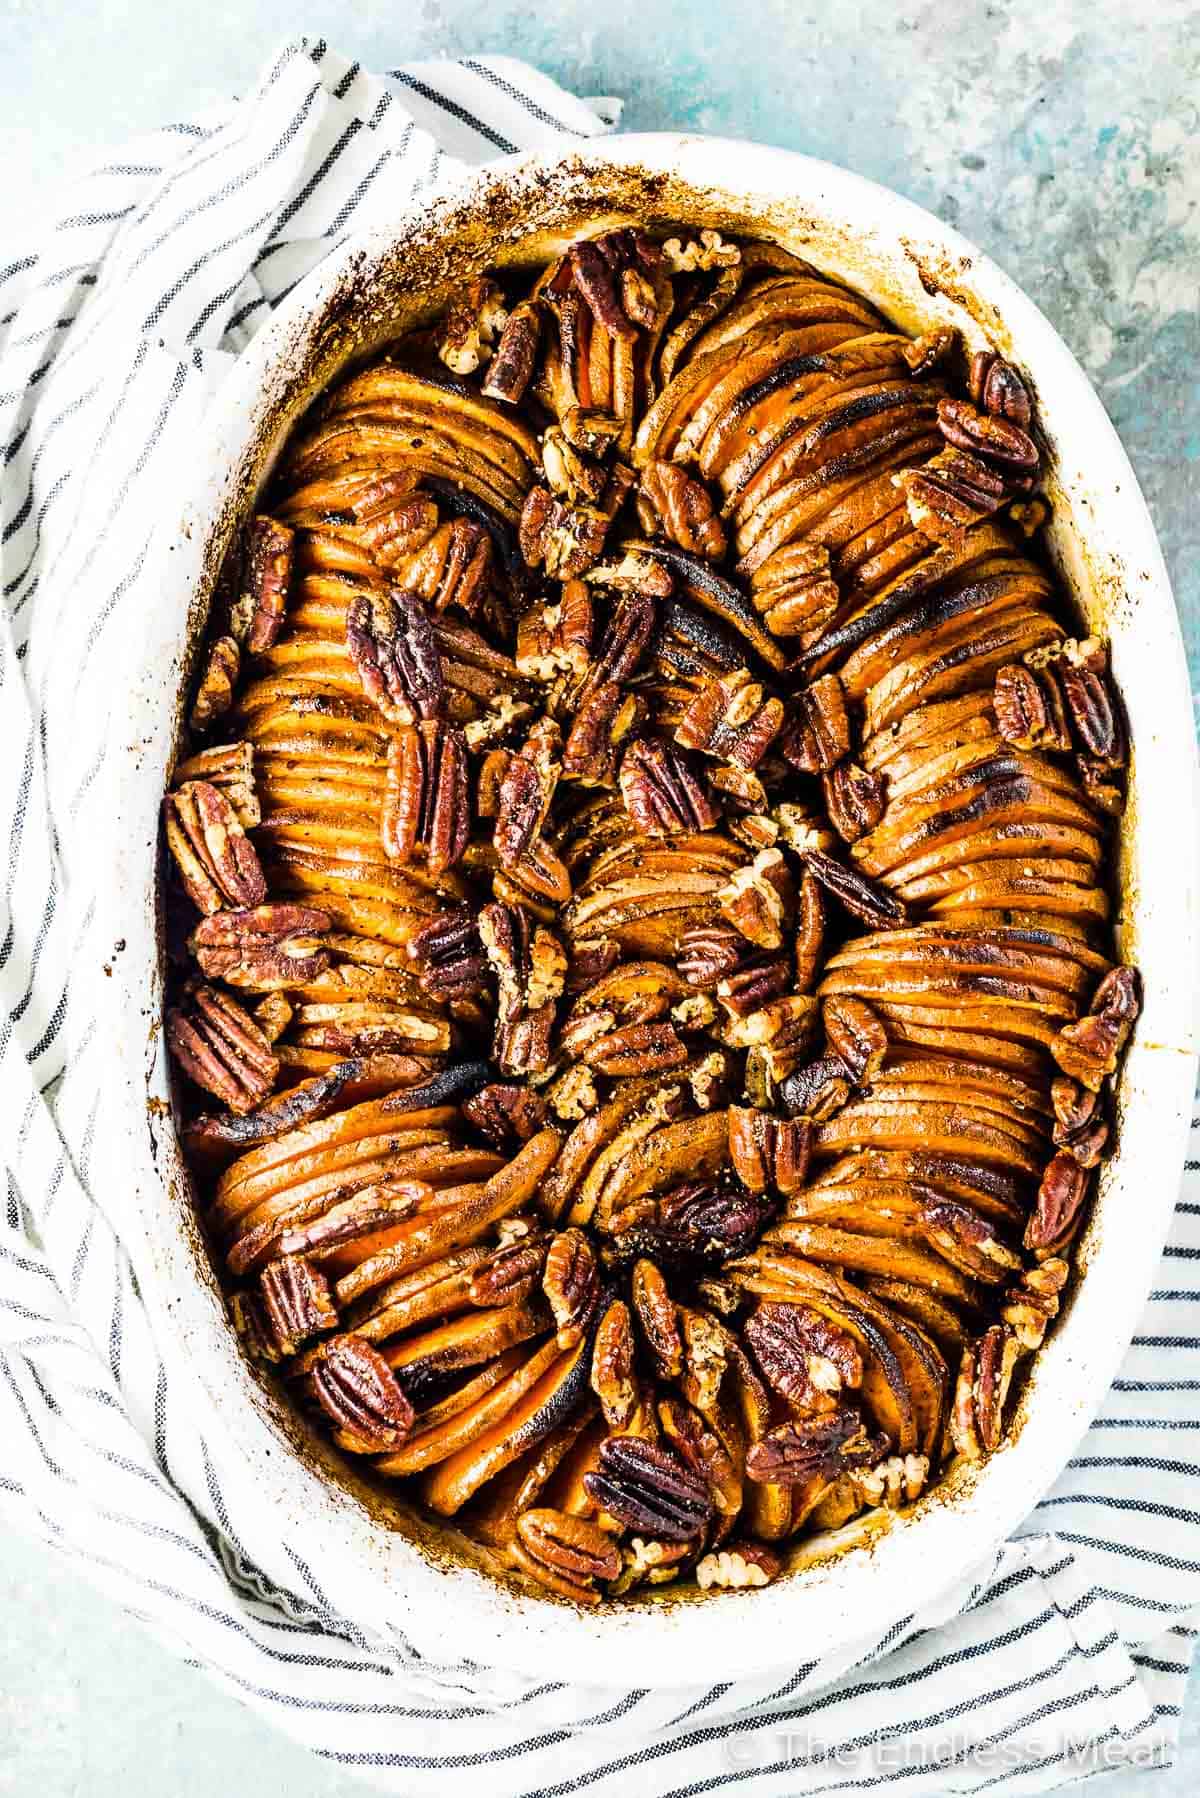 This pretty sweet potato casserole with peppery pecans over the top.